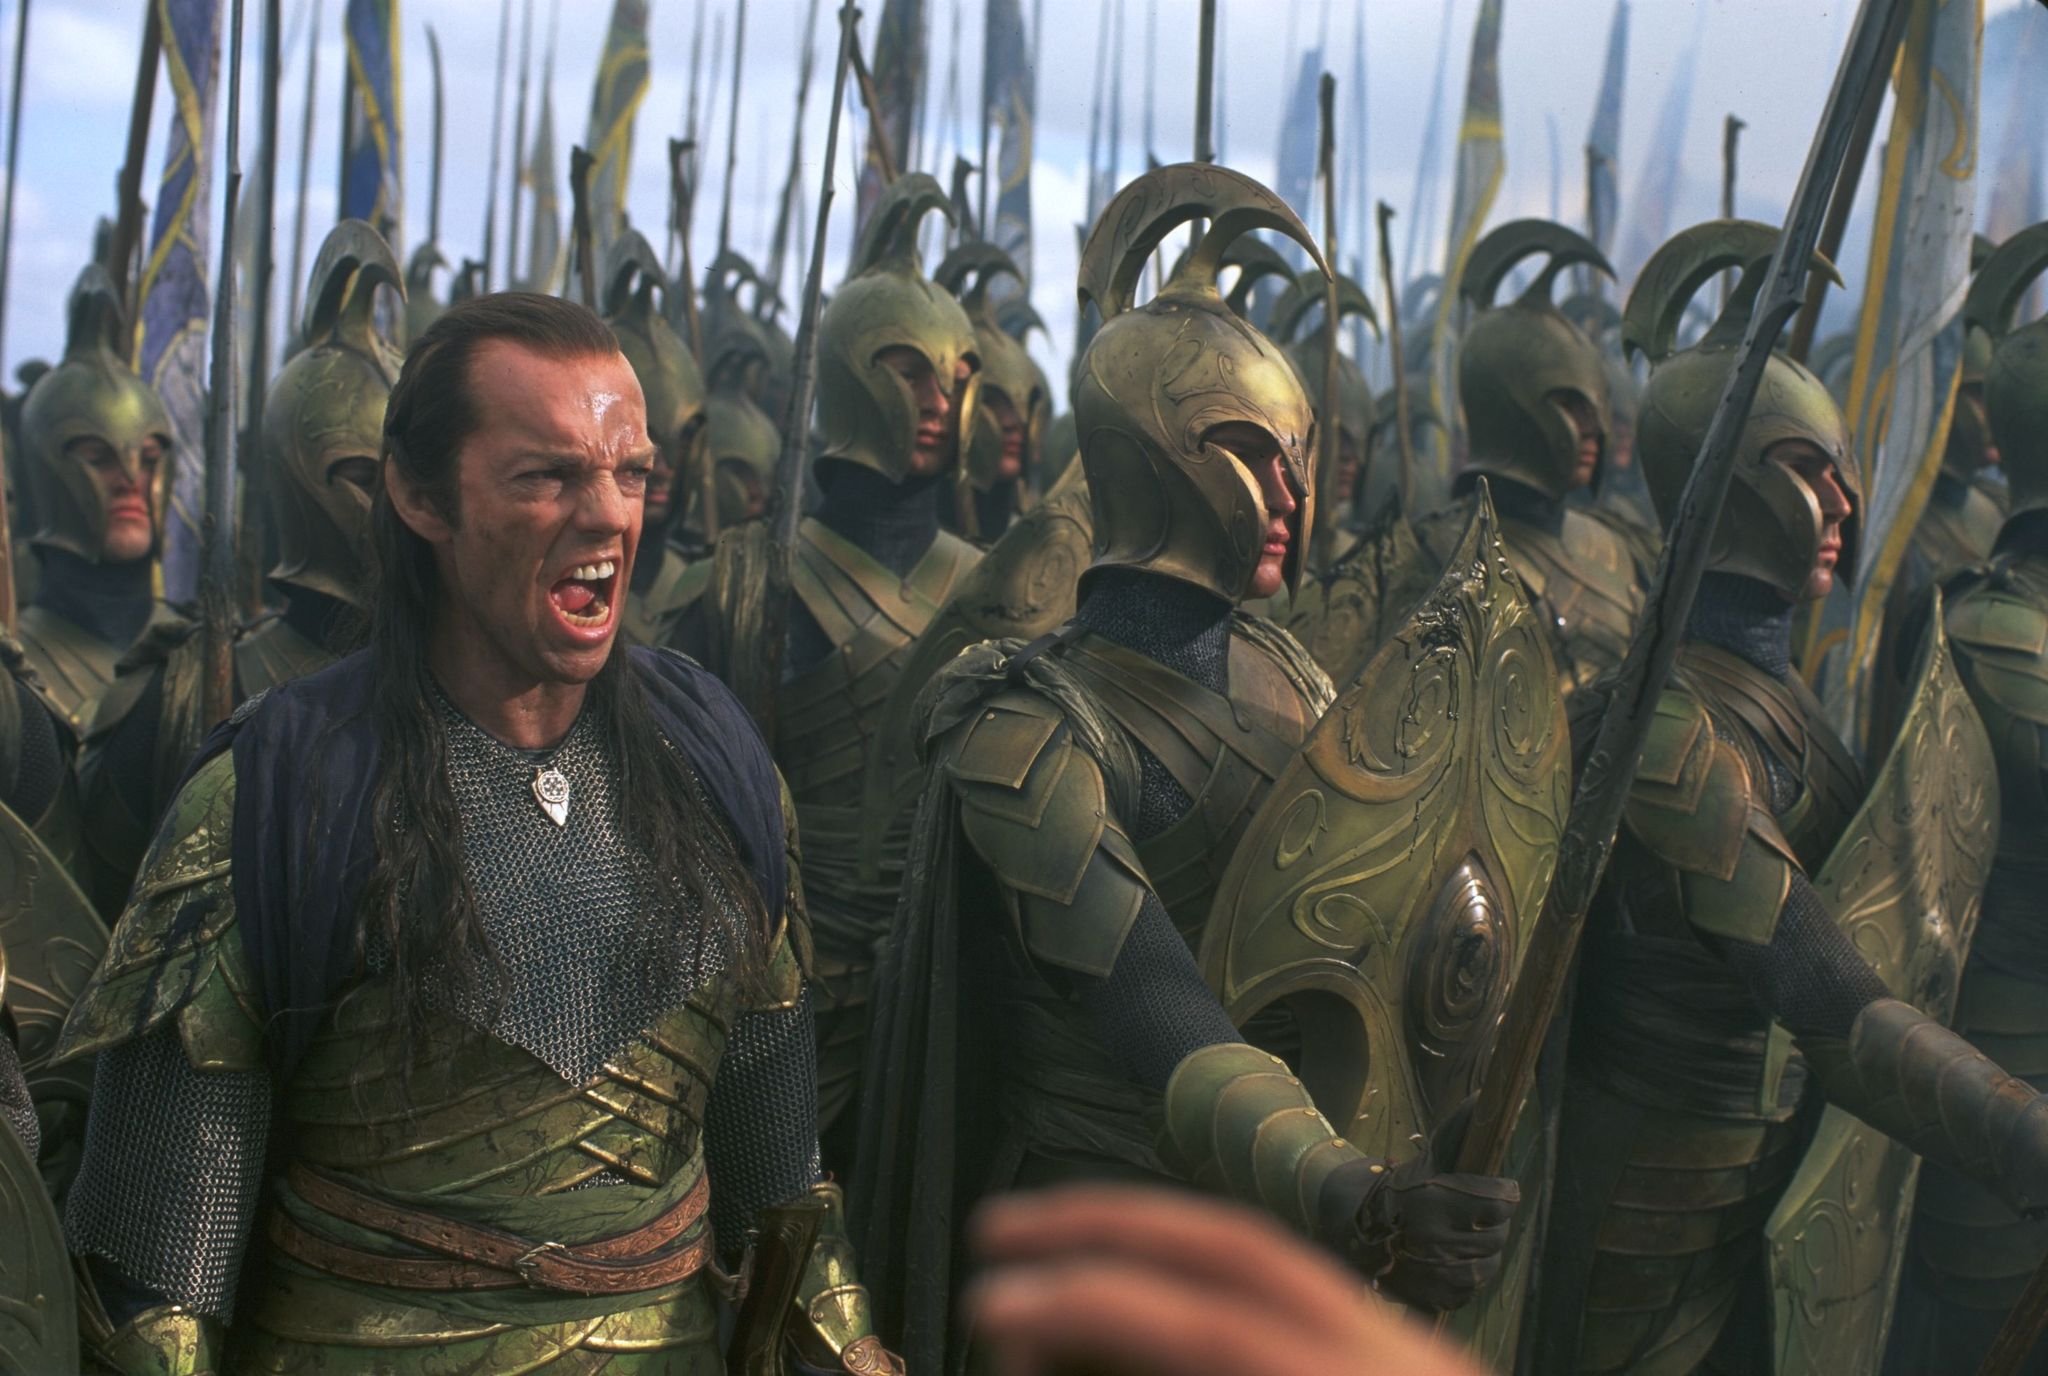 lord-of-the-rings-fellowship-of-the-ring-hugo-weaving.jpg